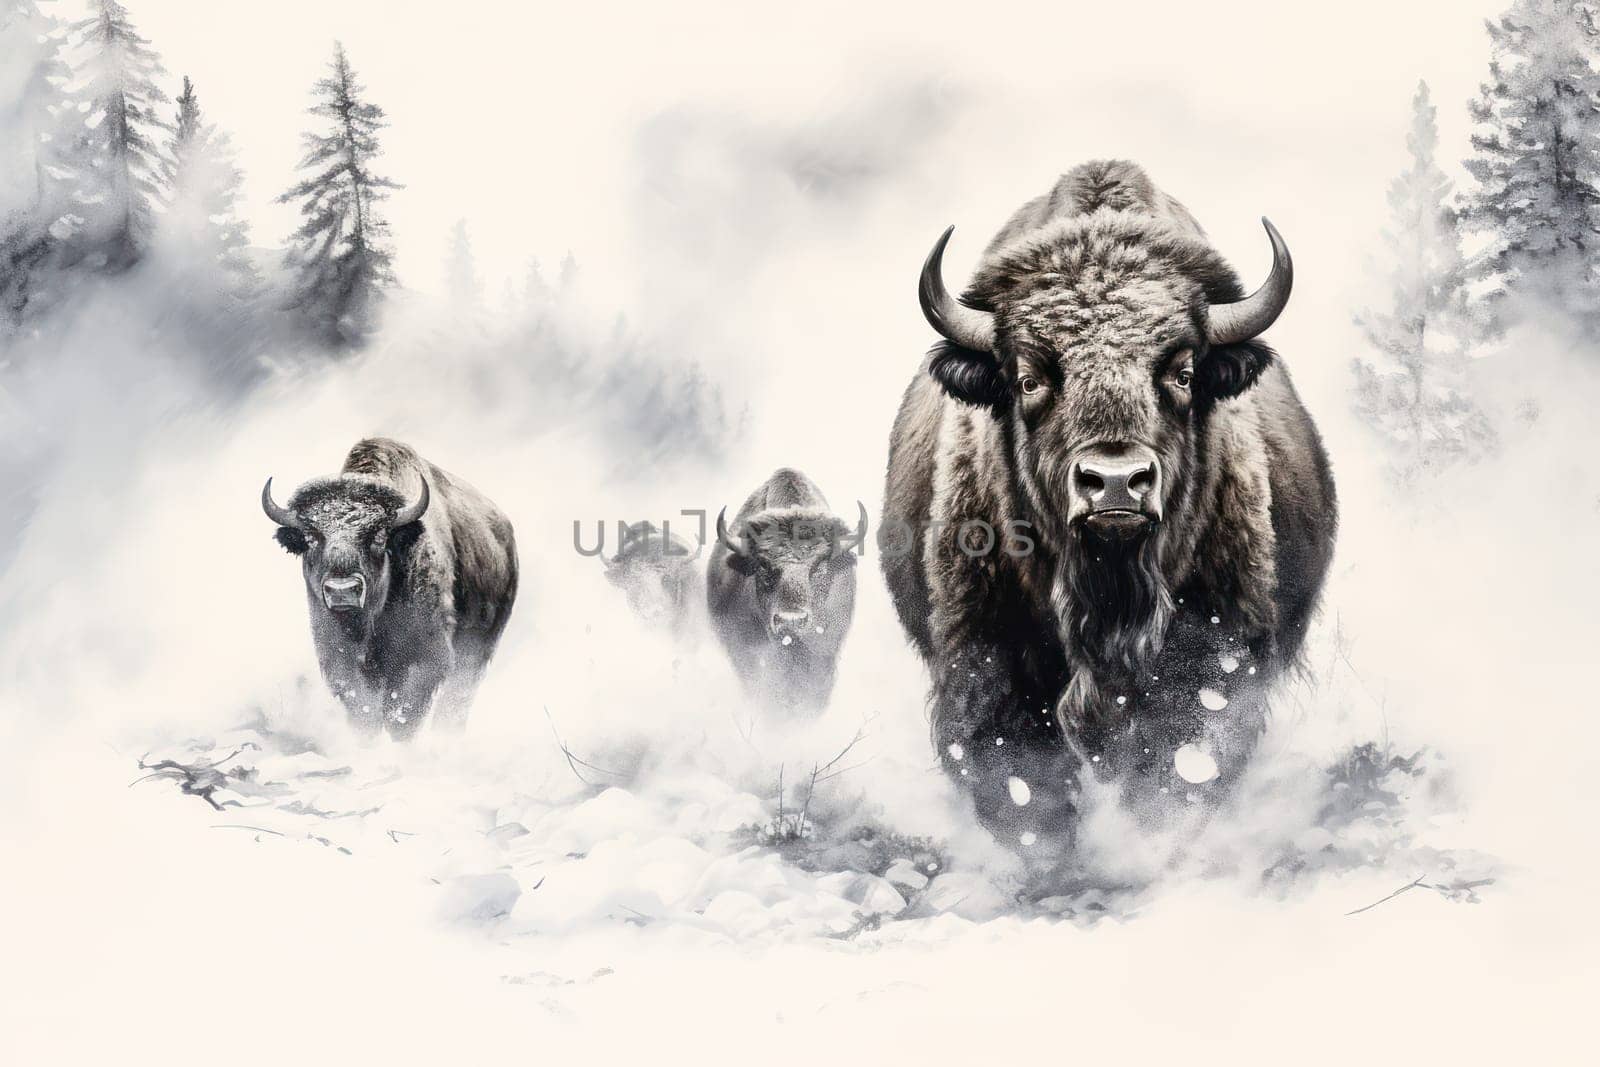 Winter Majesty: A Majestic Group of Bison Grazing in the Snowy Wyoming Wilderness by Vichizh